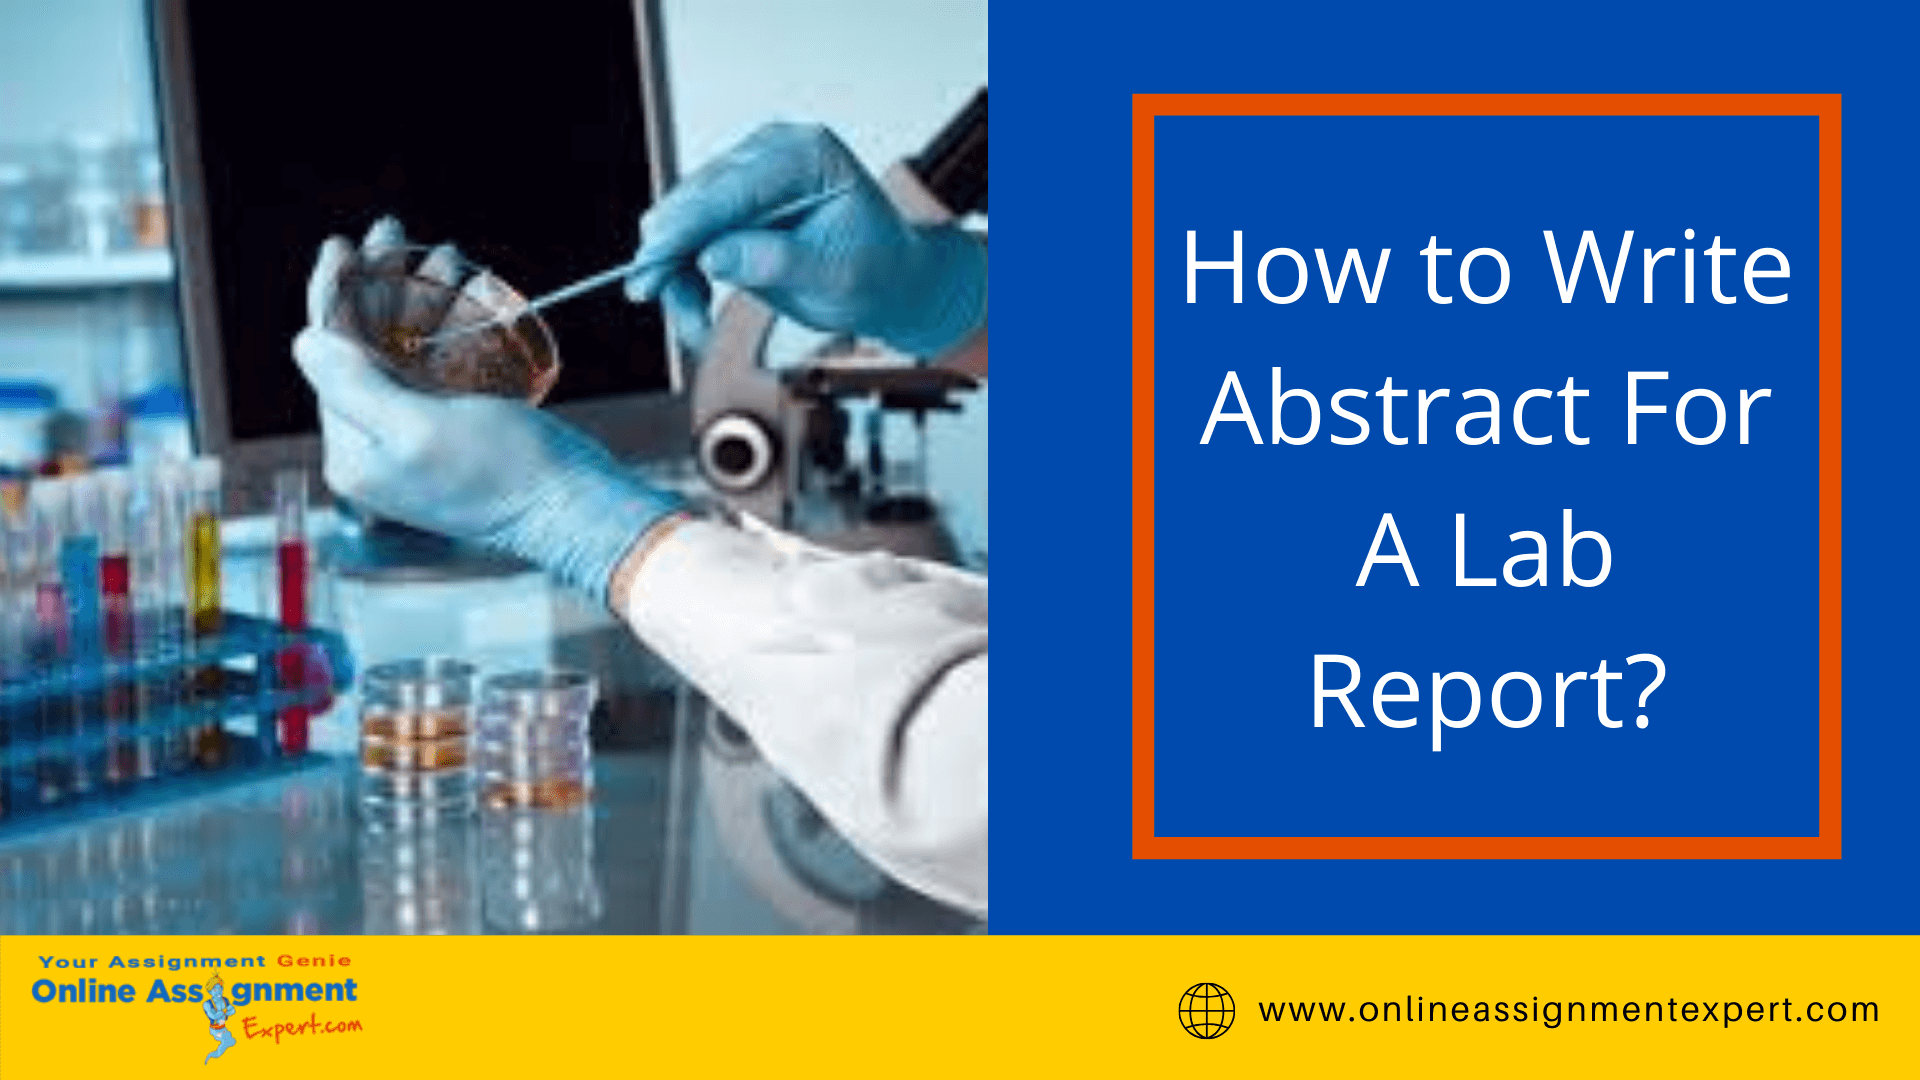 How to Write Abstract For A Lab Report?